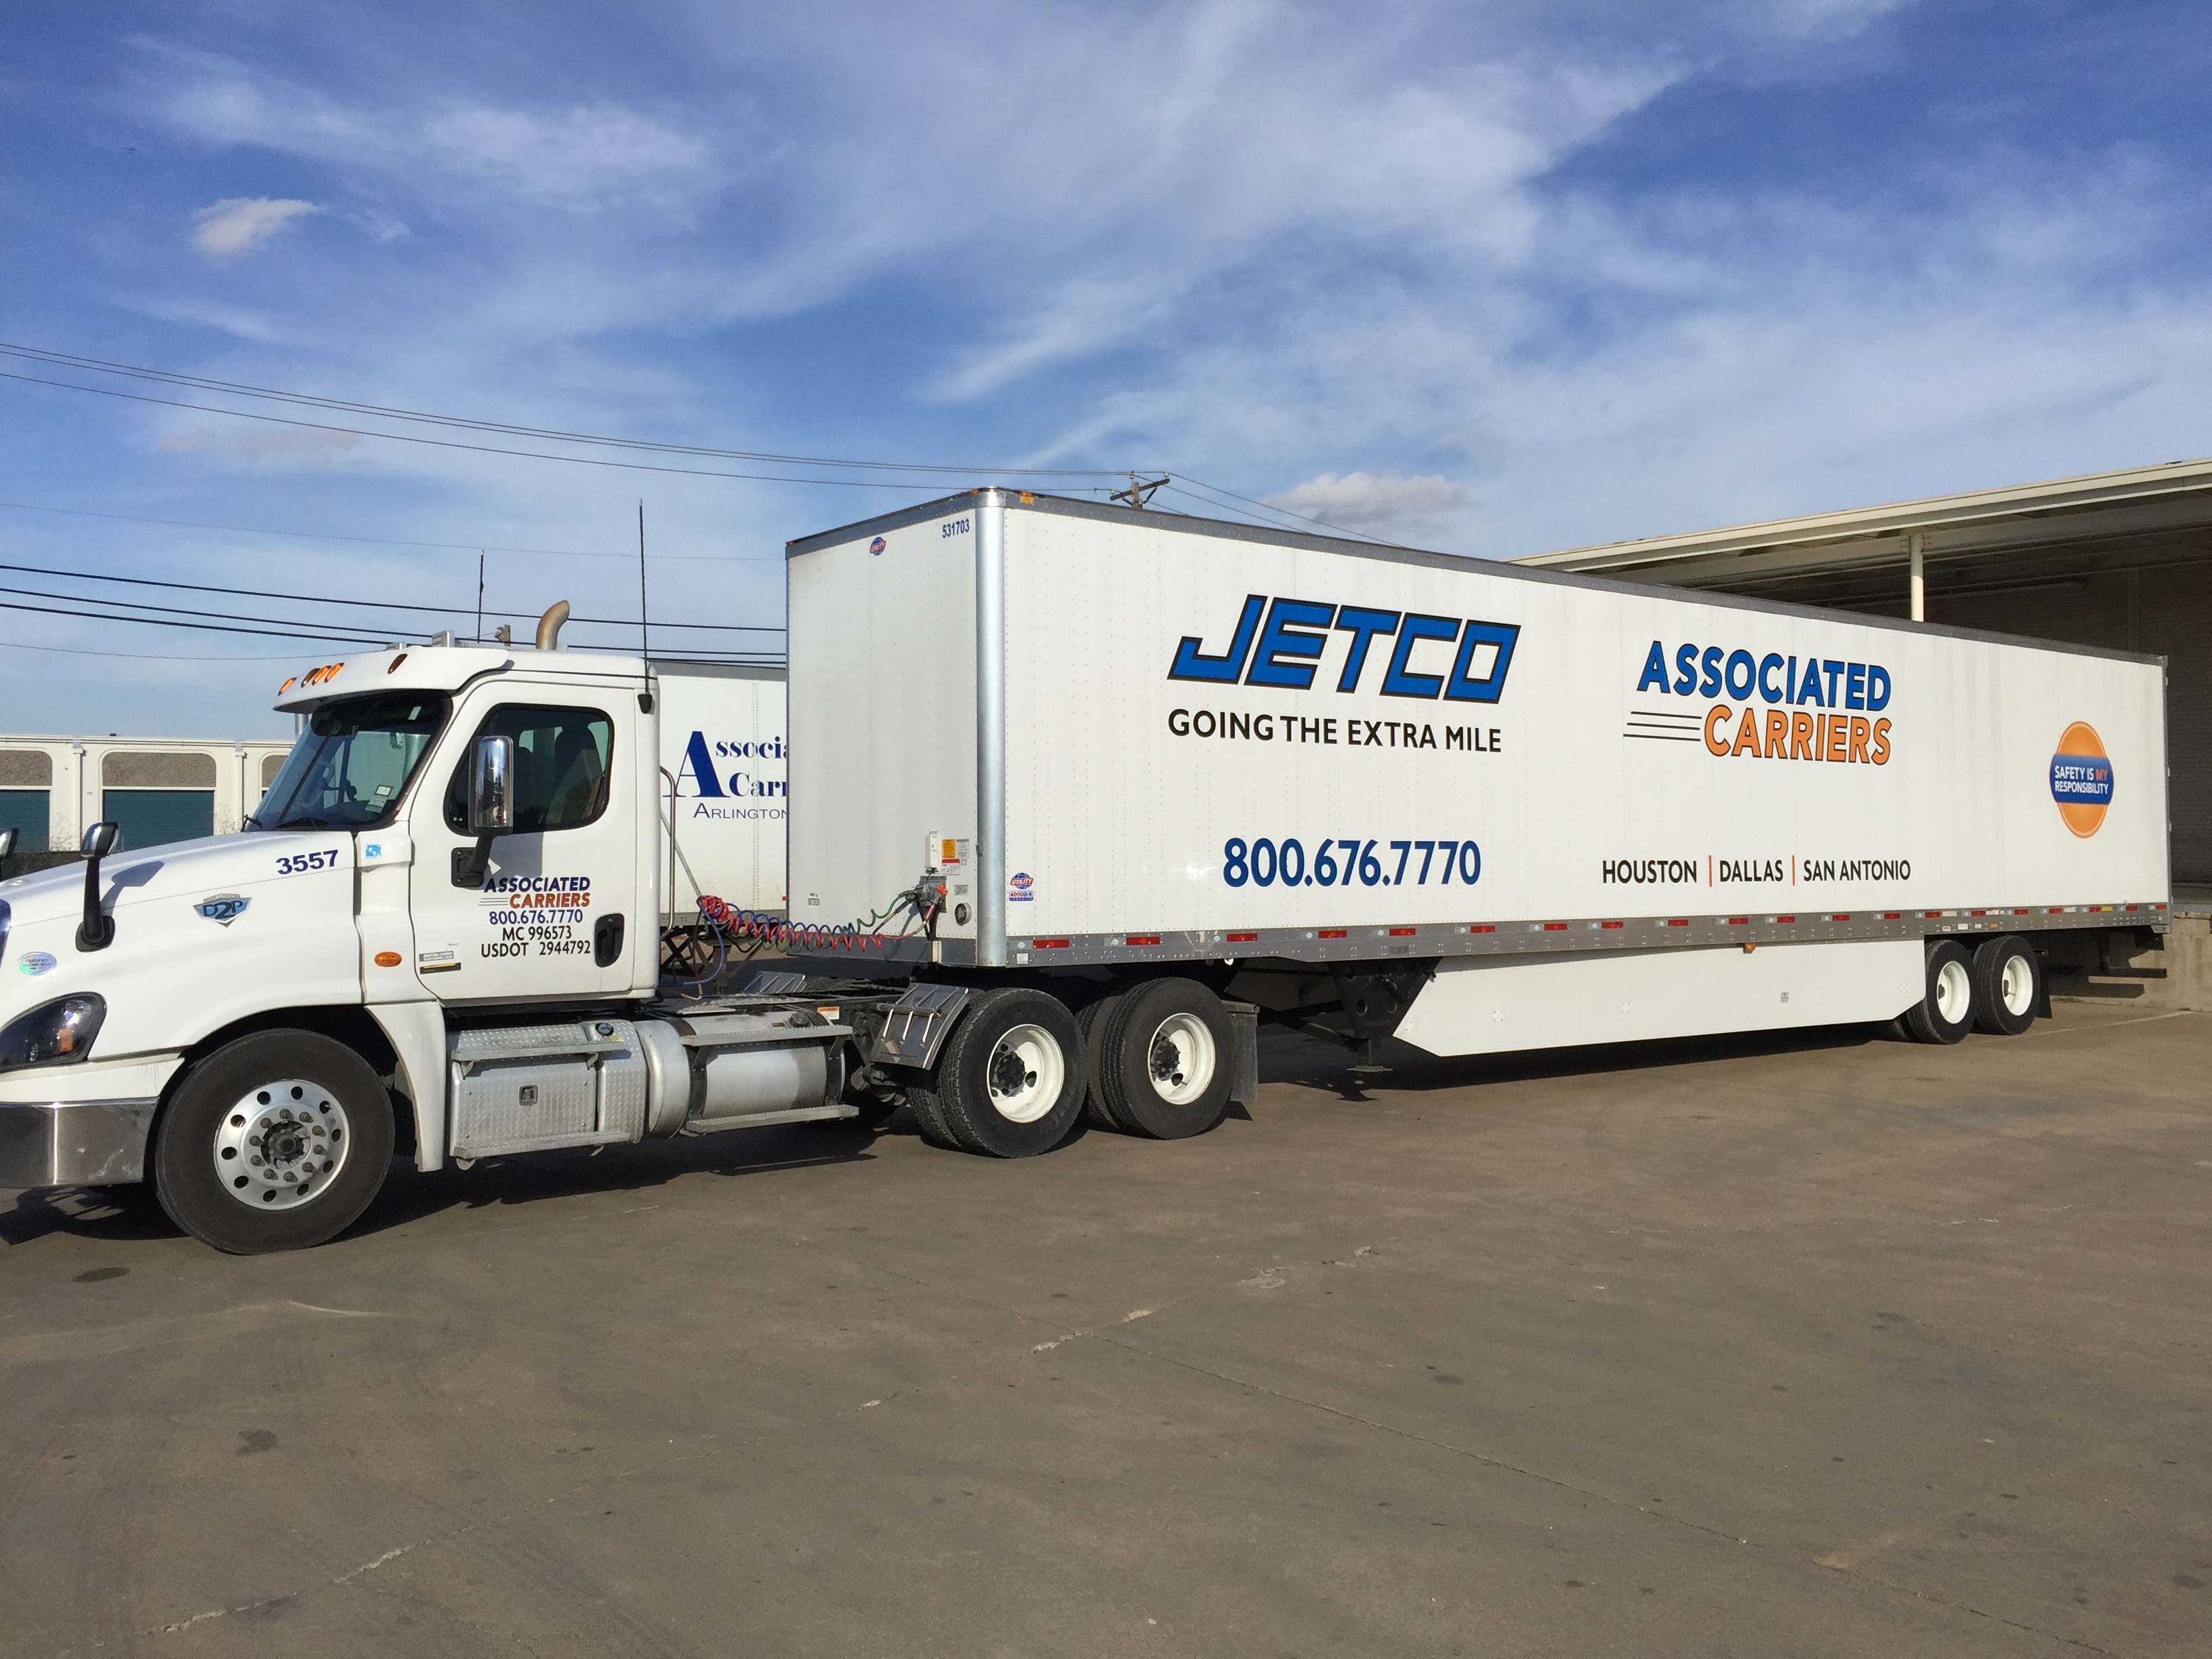 Associated Carriers Joins the Jetco Family